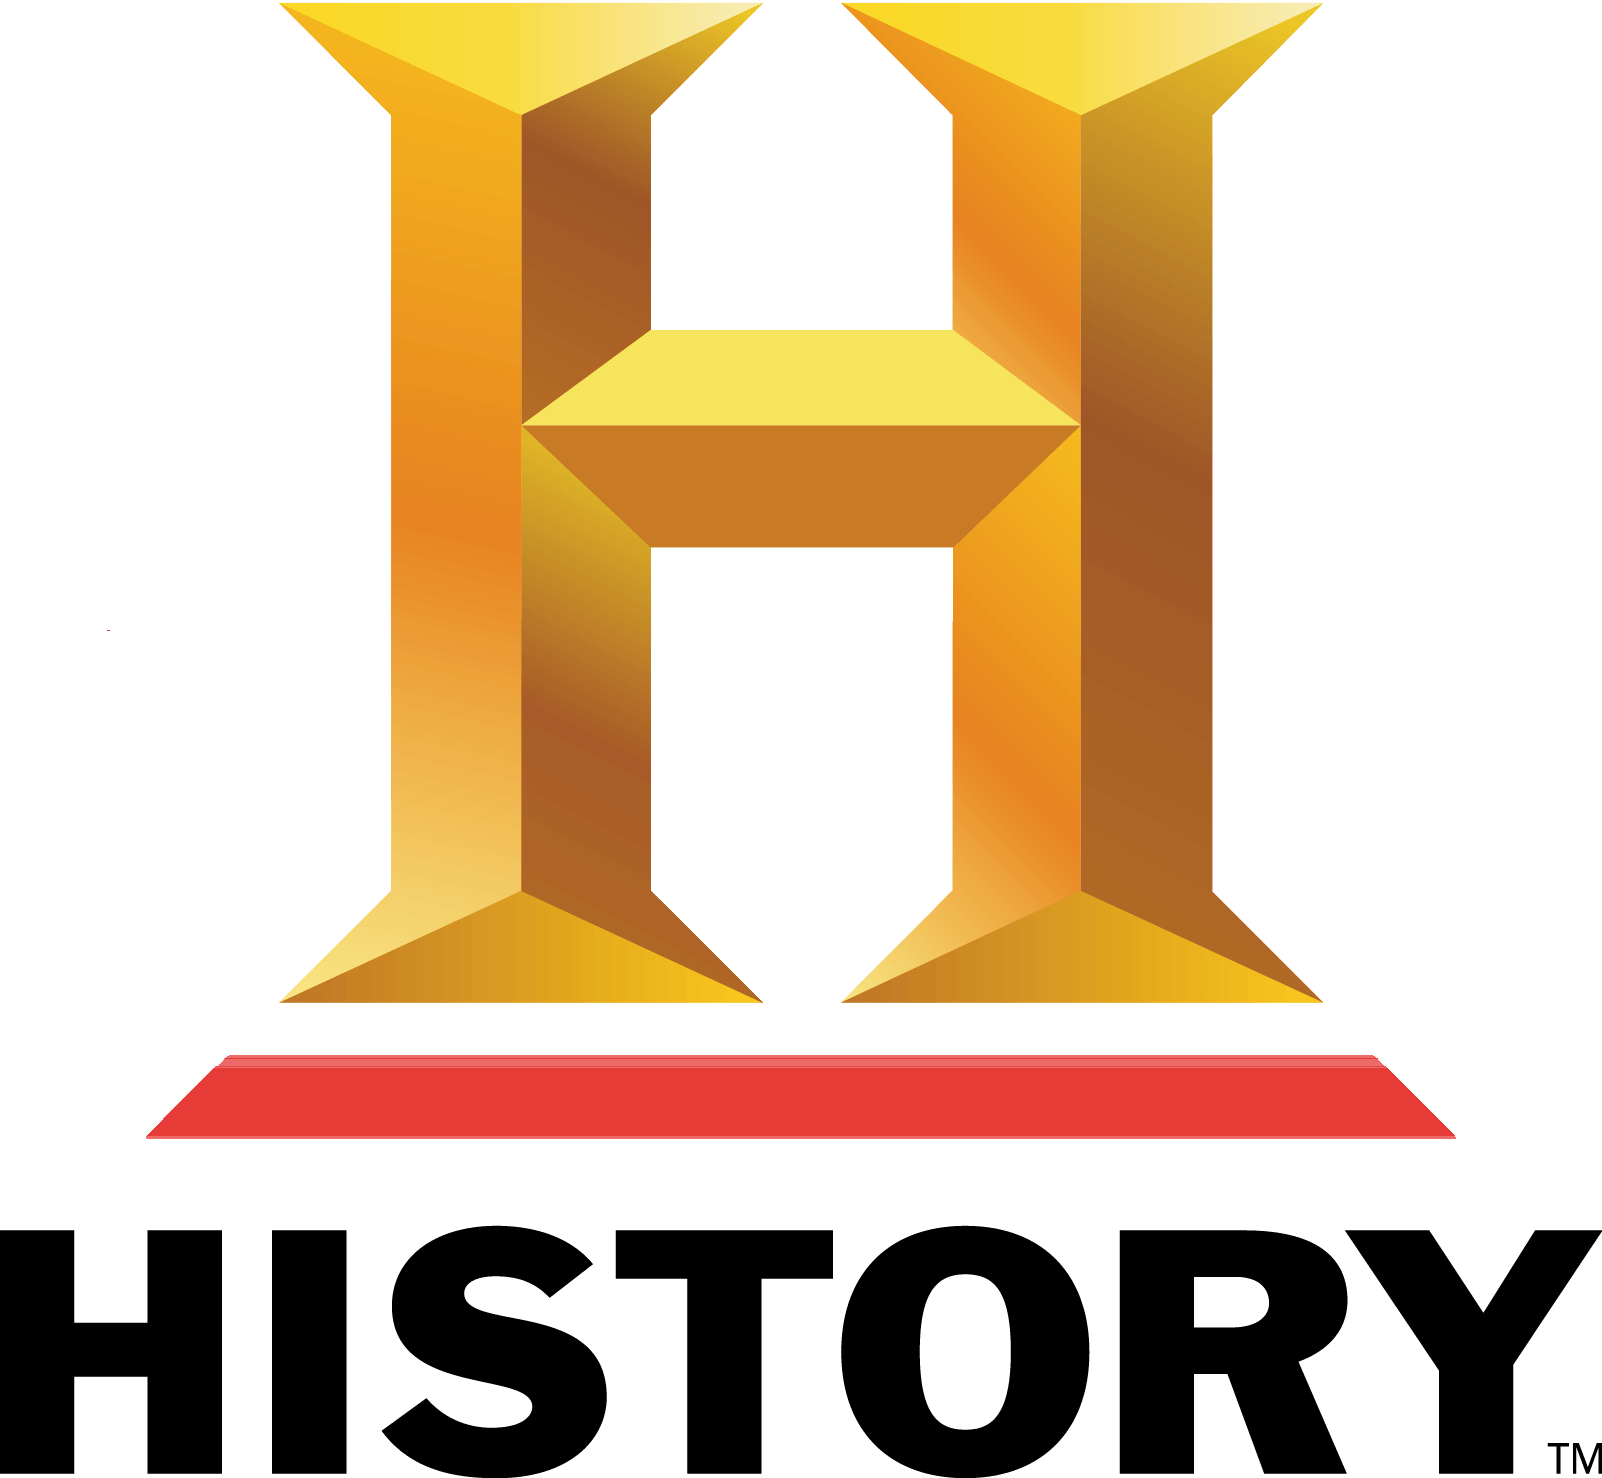 TV Channel Logo - History TV Channel Logo Free Vector Download - FreeLogoVectors